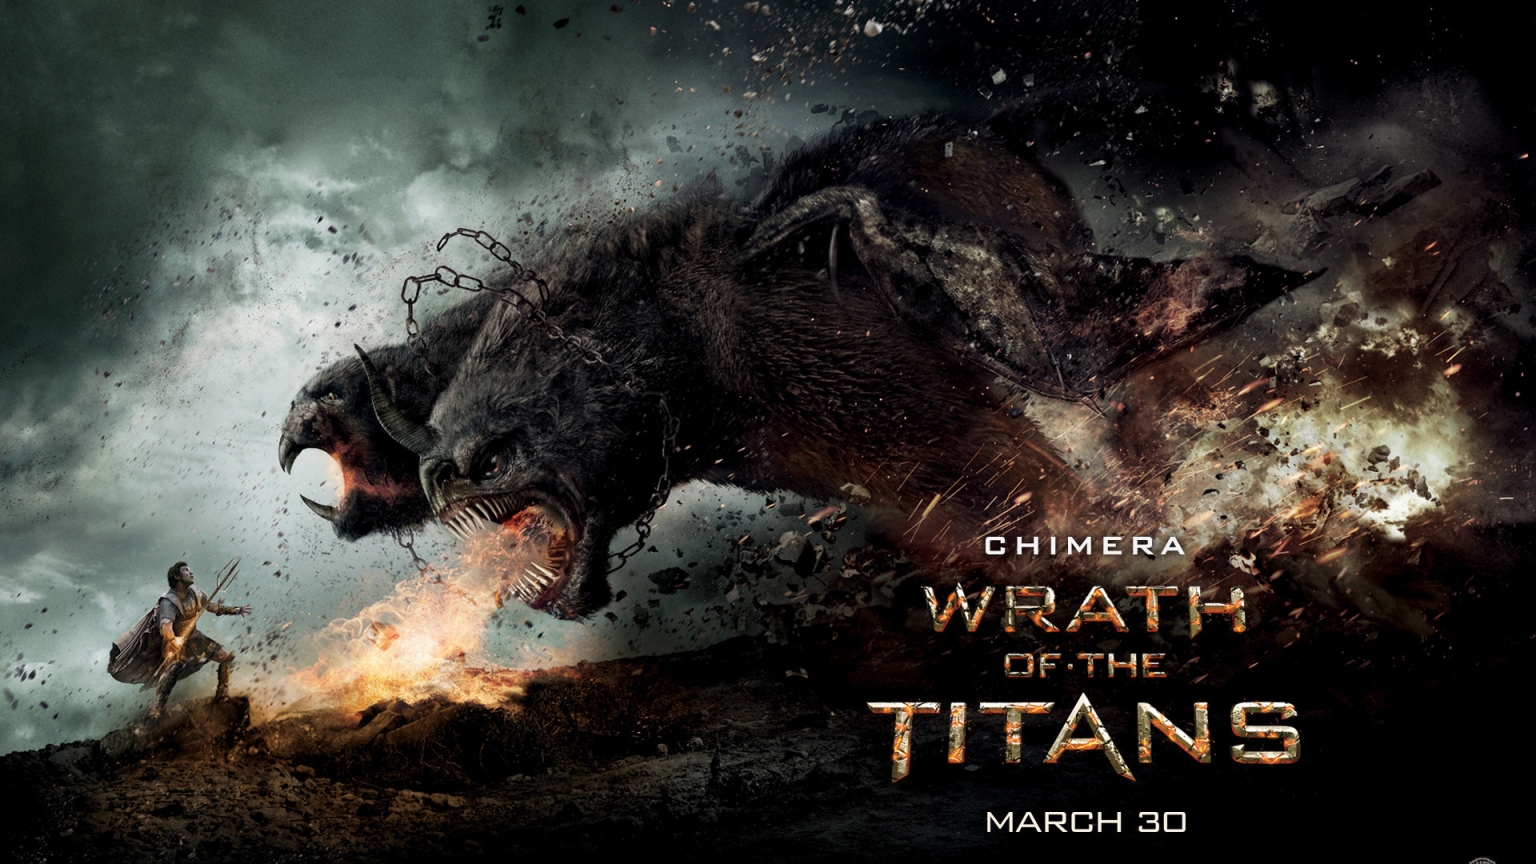 Chimera Wrath of the Titans for 1536 x 864 HDTV resolution